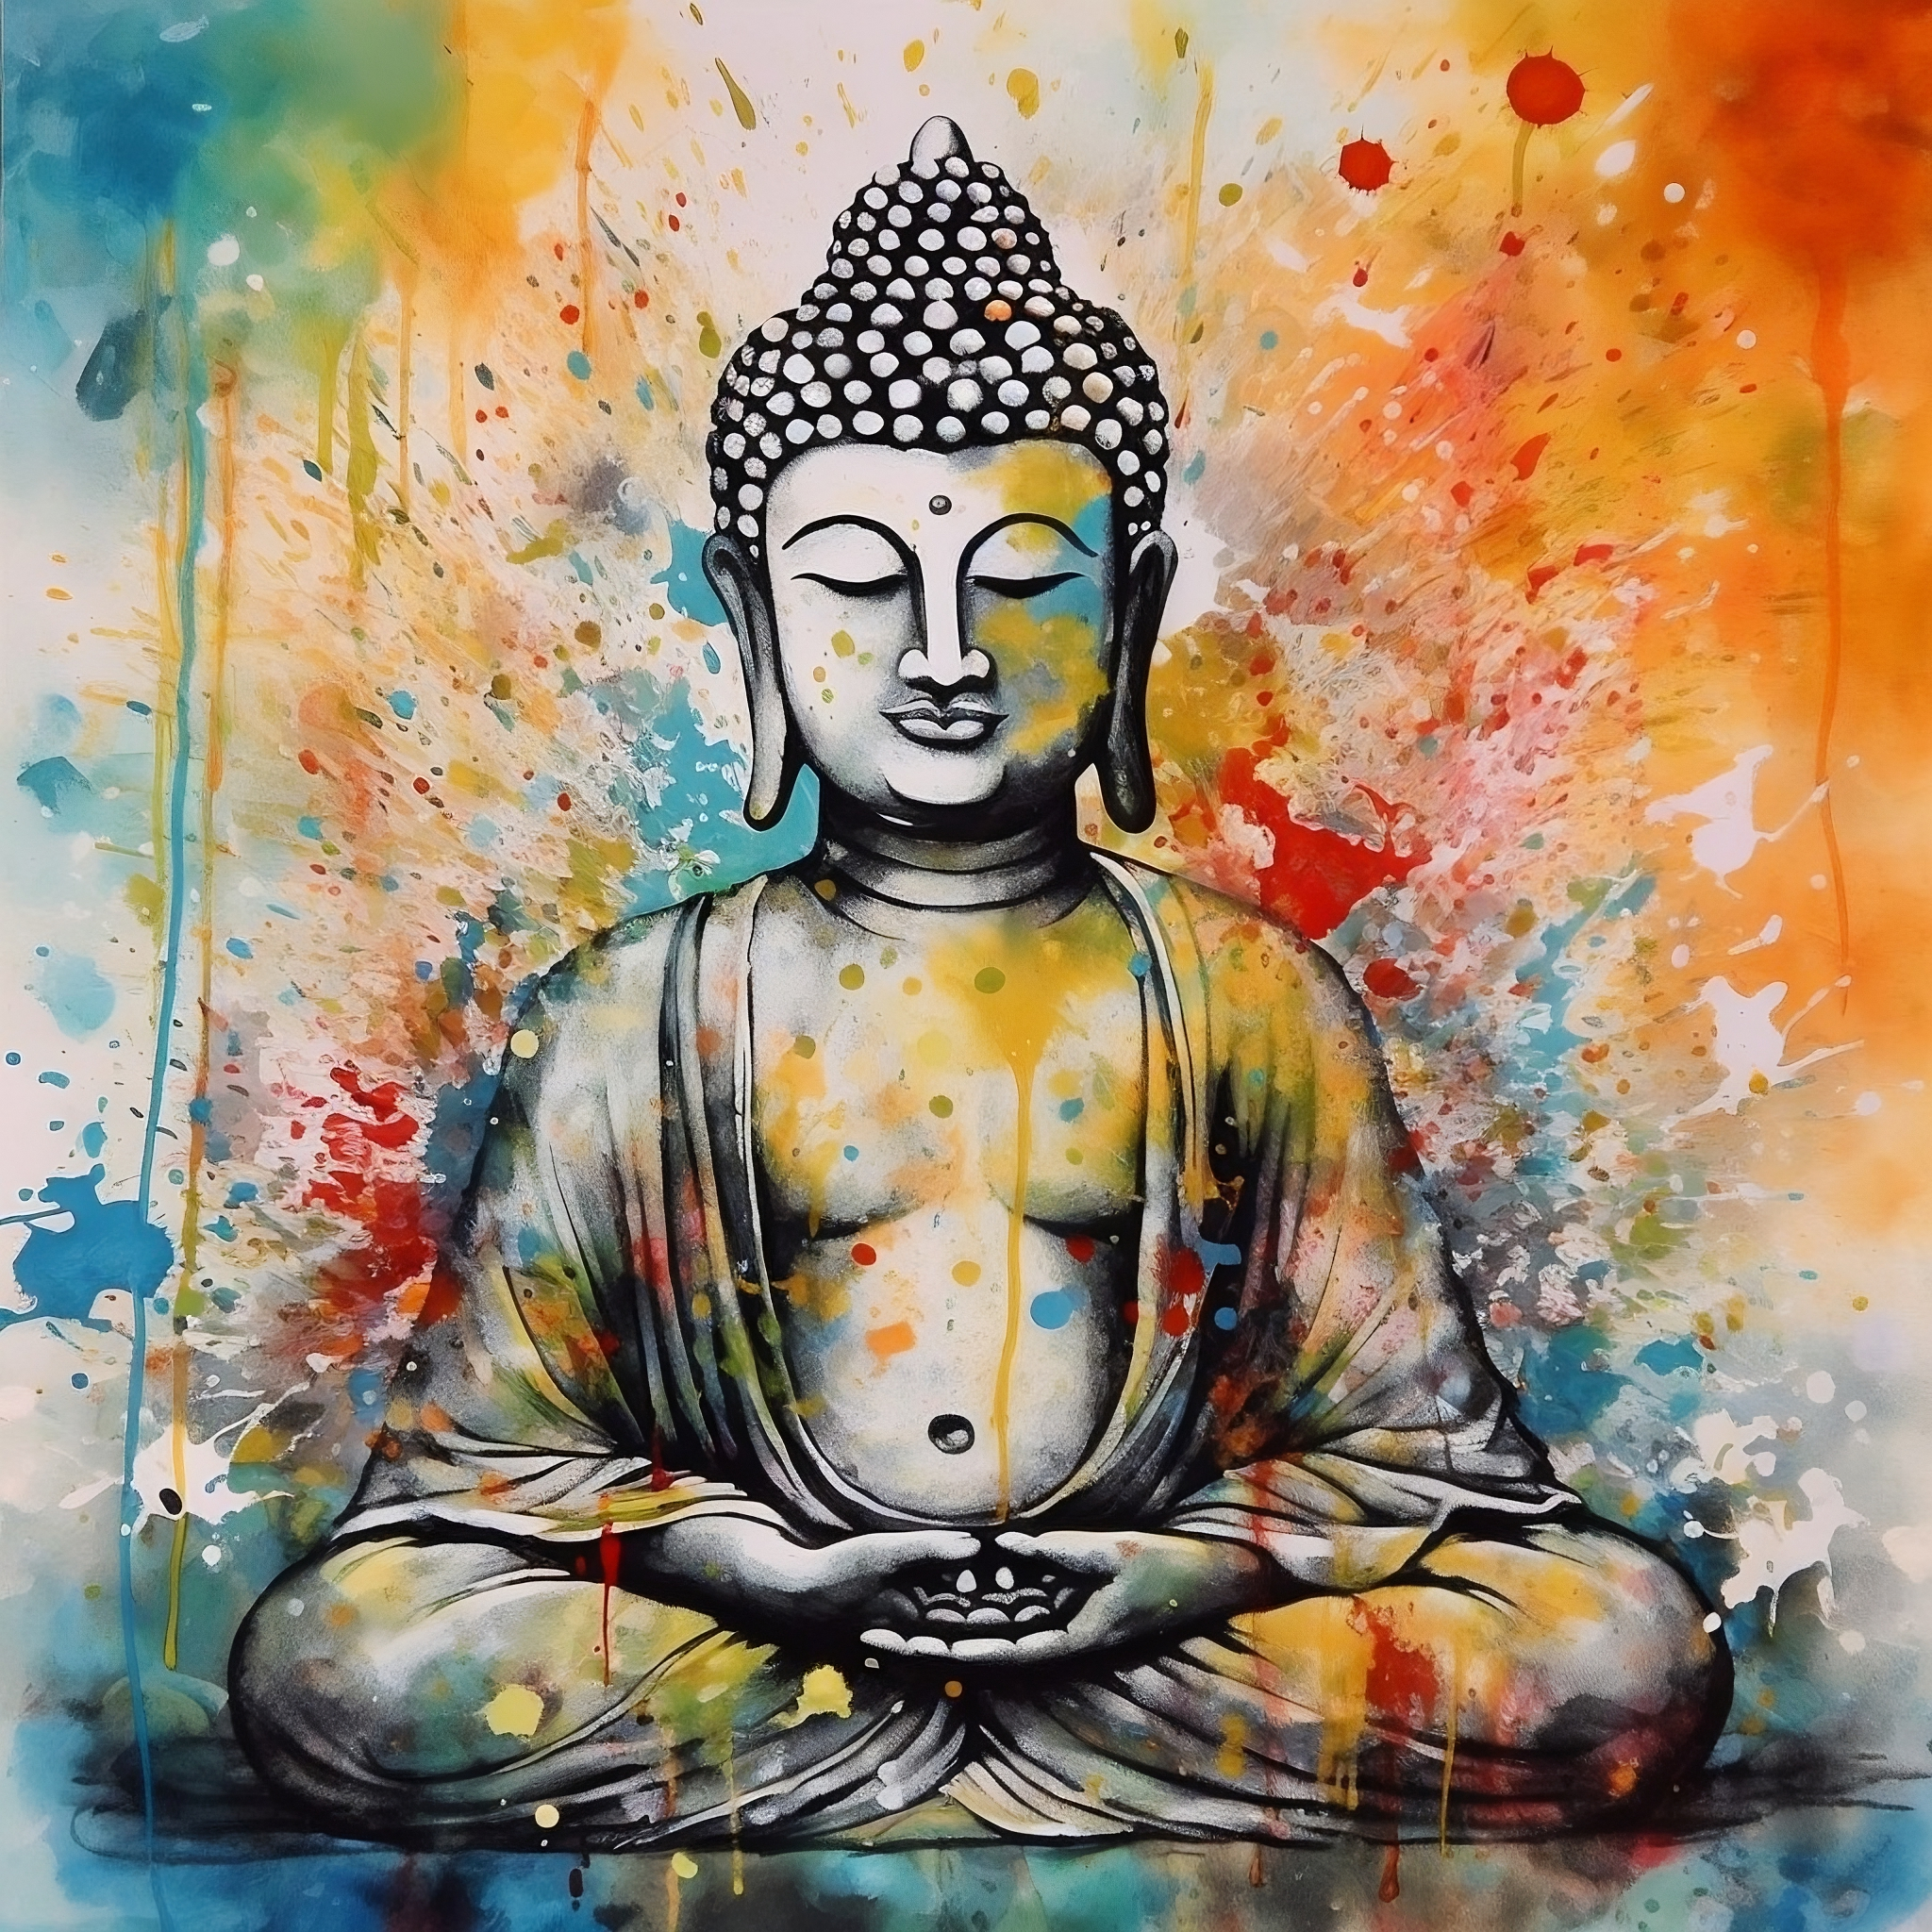 A Vibrant Watercolor Print of Buddha with Splashes of Life